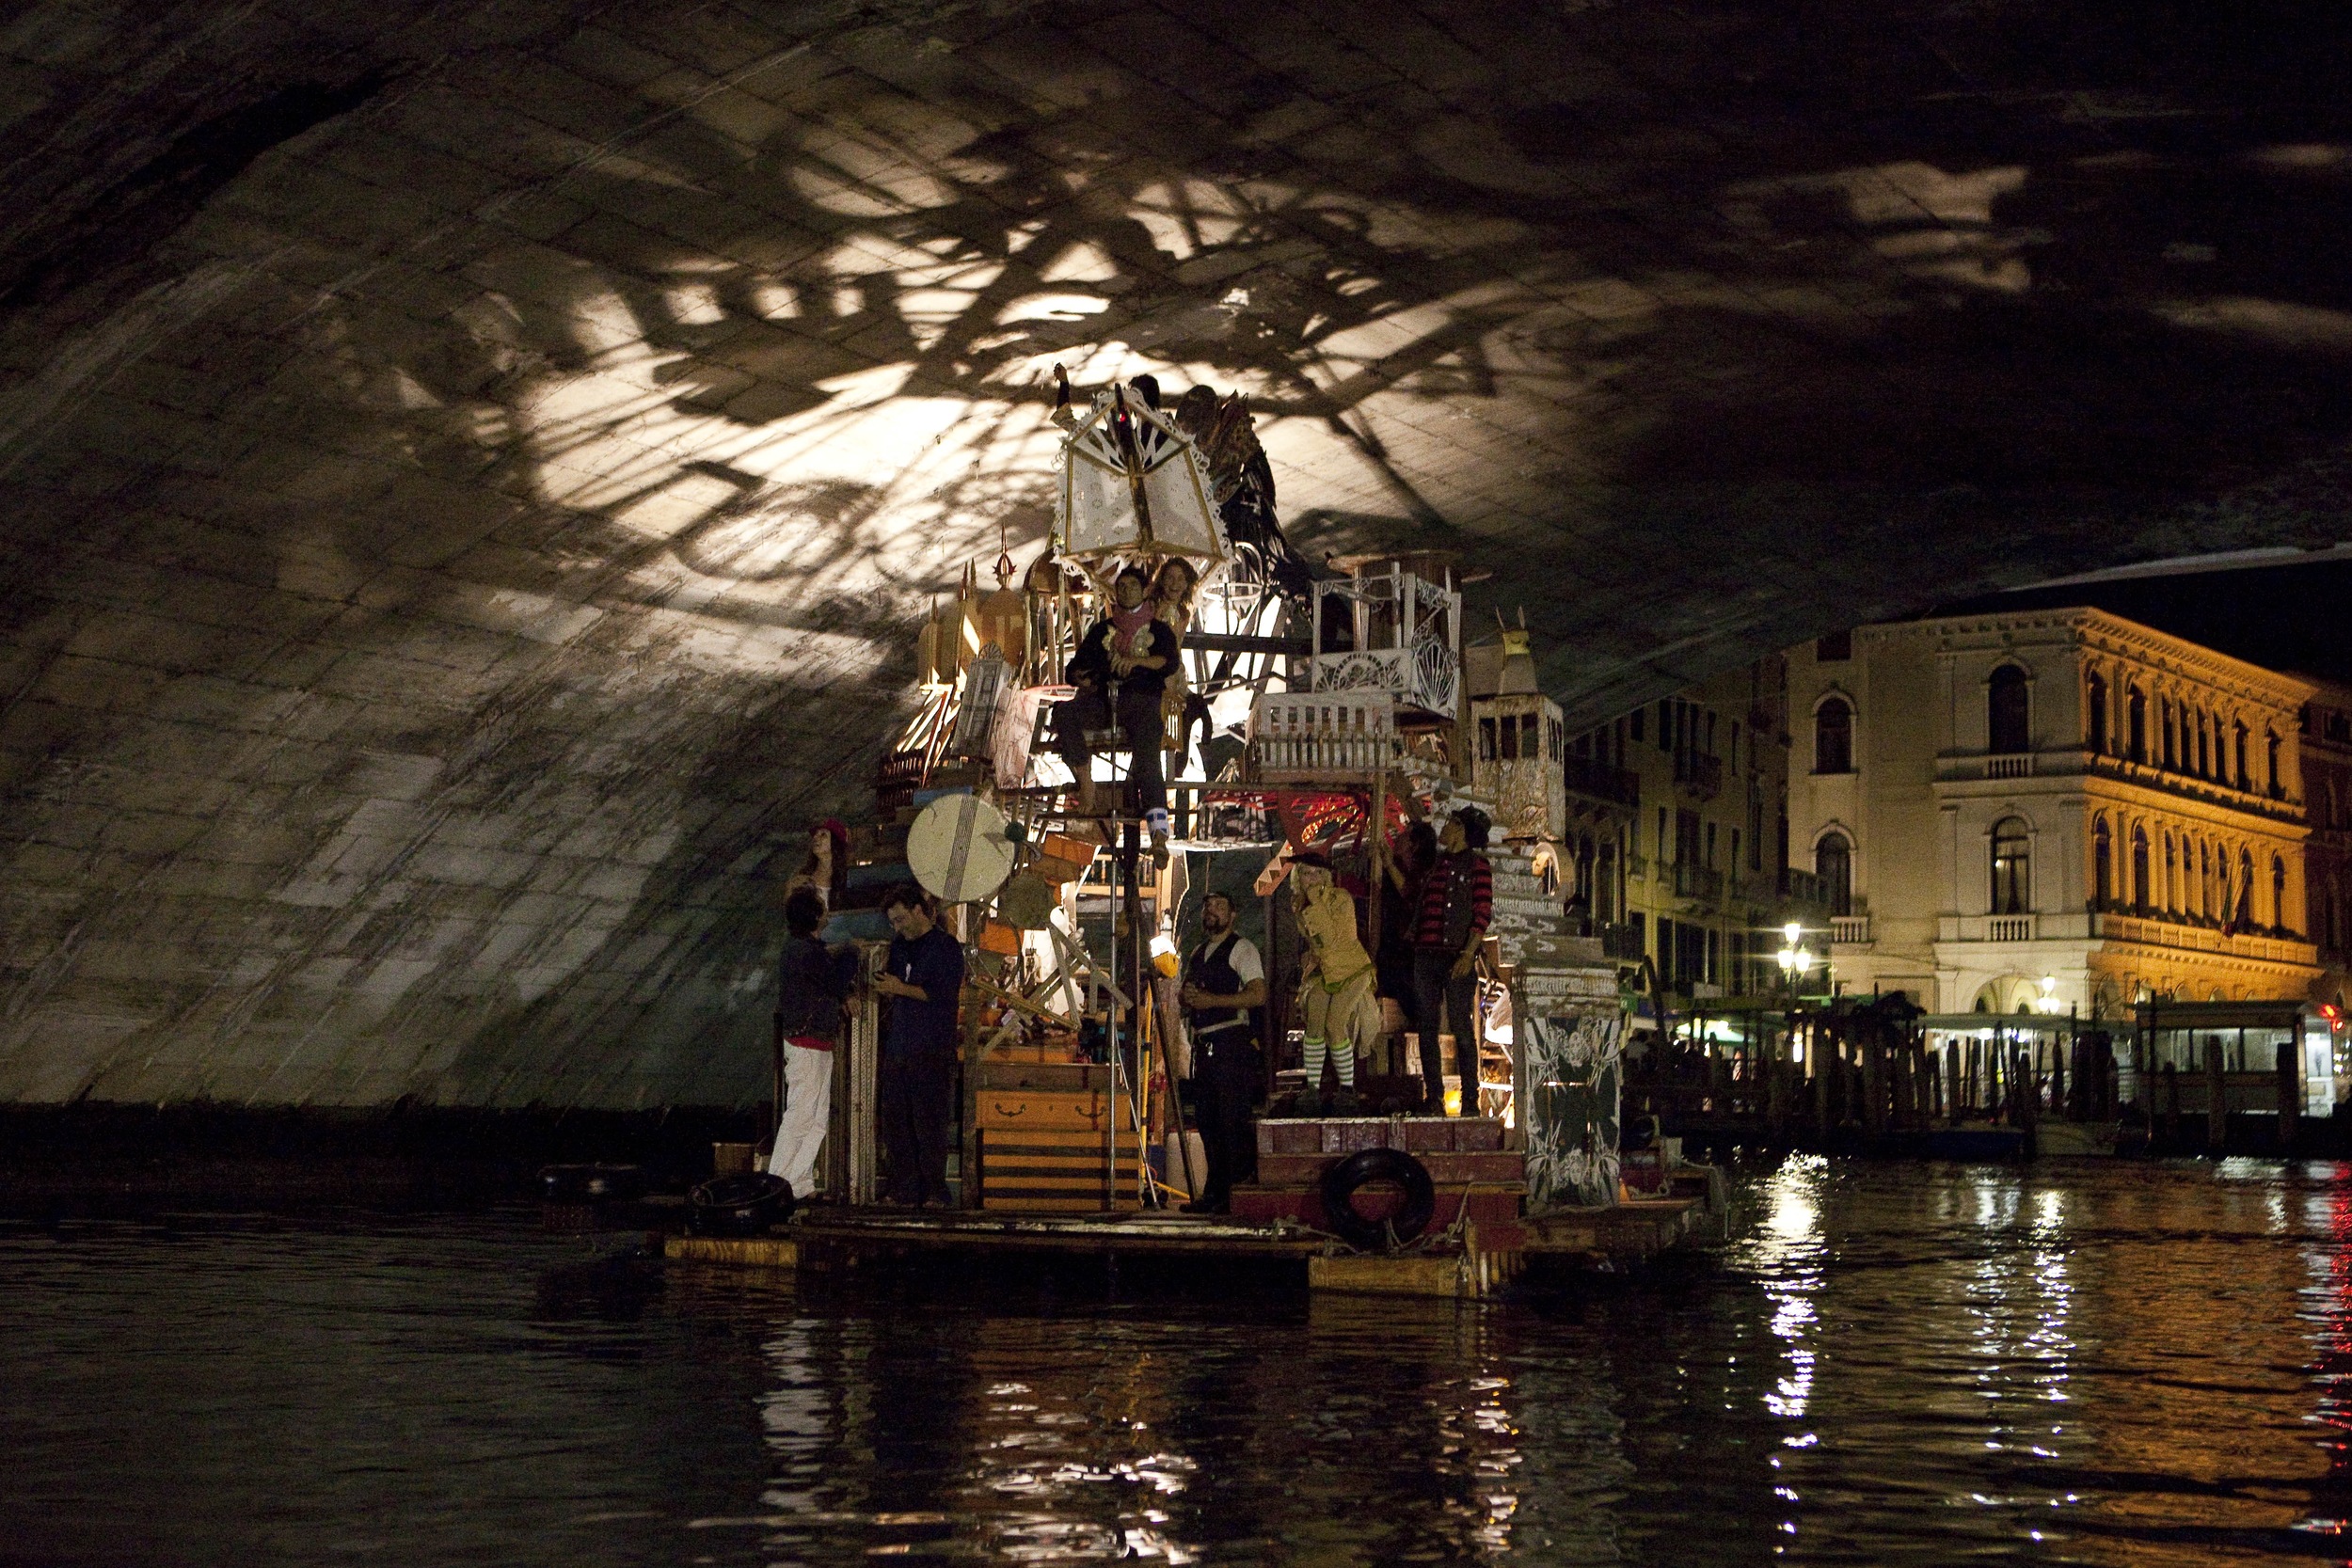   Swimming Cities of Serenissima : Stopping along the way to perform live music, puppetry, and more, Swoon and 35 artistic collaborators sailed across the Adriatic Sea from Slovenia to the 2009 Venice Biennale. ( Photo : Tod Seelie) &nbsp; &nbsp; &nb